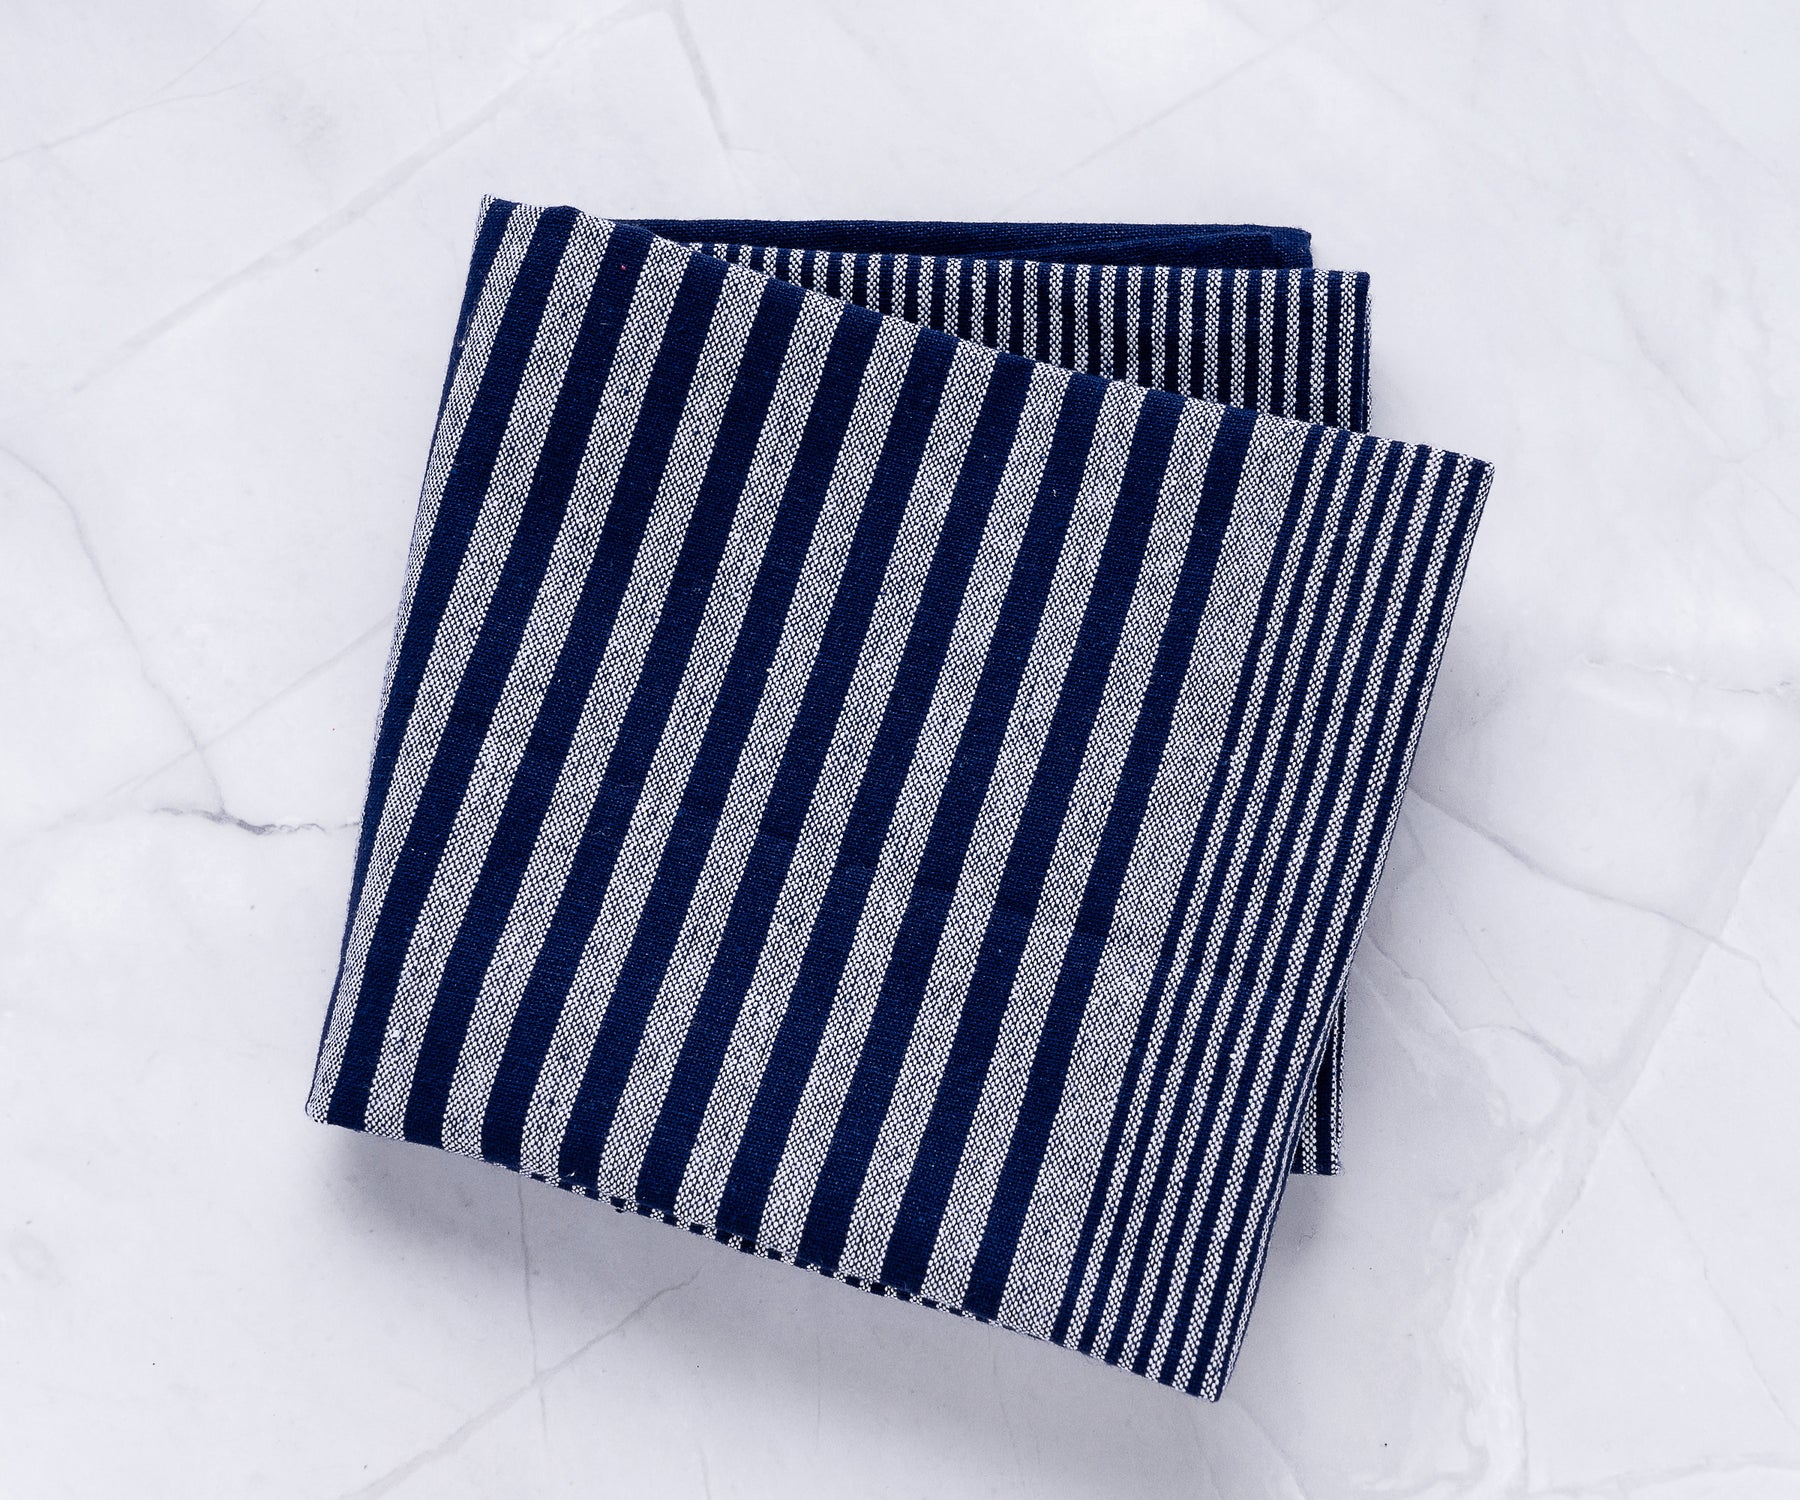 Hand towels for the kitchen, practical and versatile.